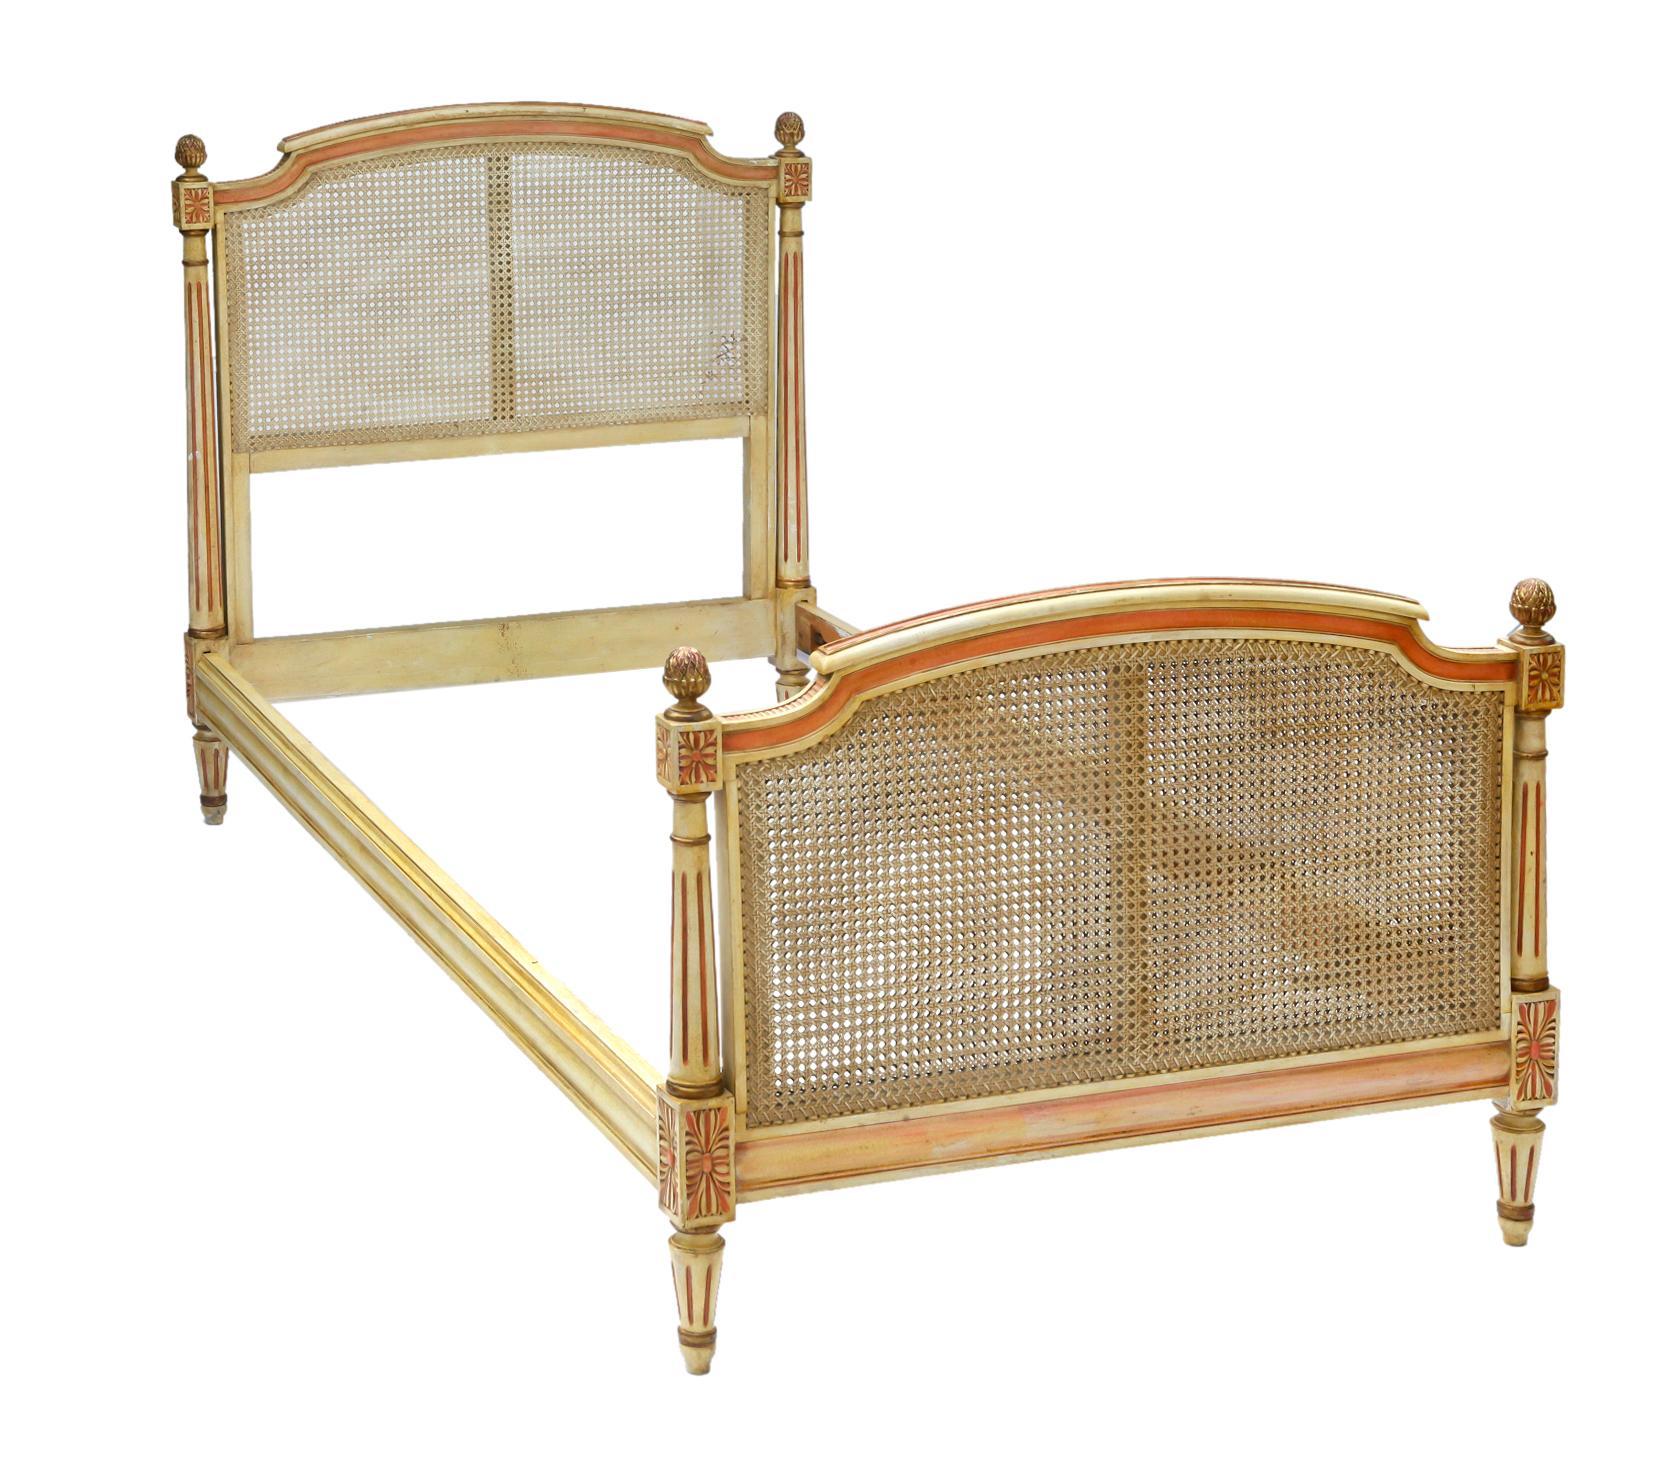 Caning Designer French Provincial Beds & Commodes; 4 piece set